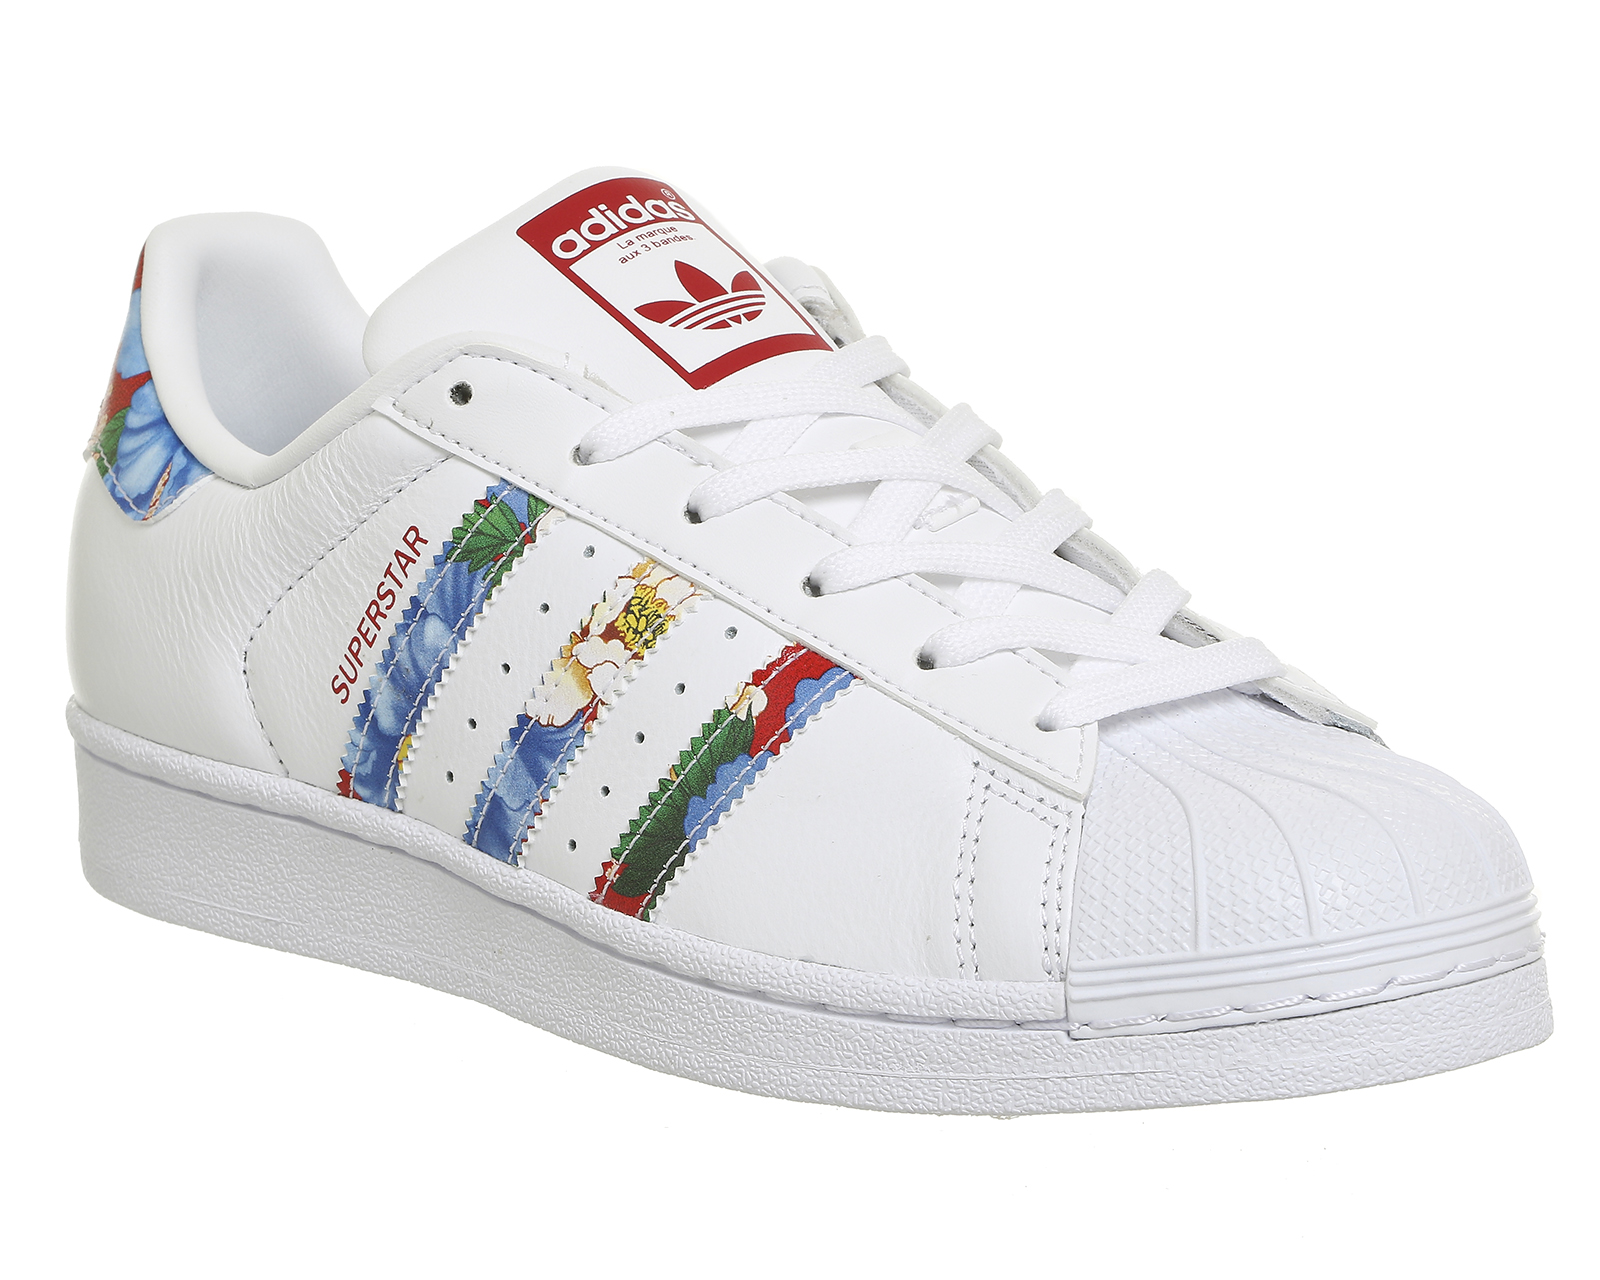 adidas Superstar 1 White Red Floral - Hers trainers